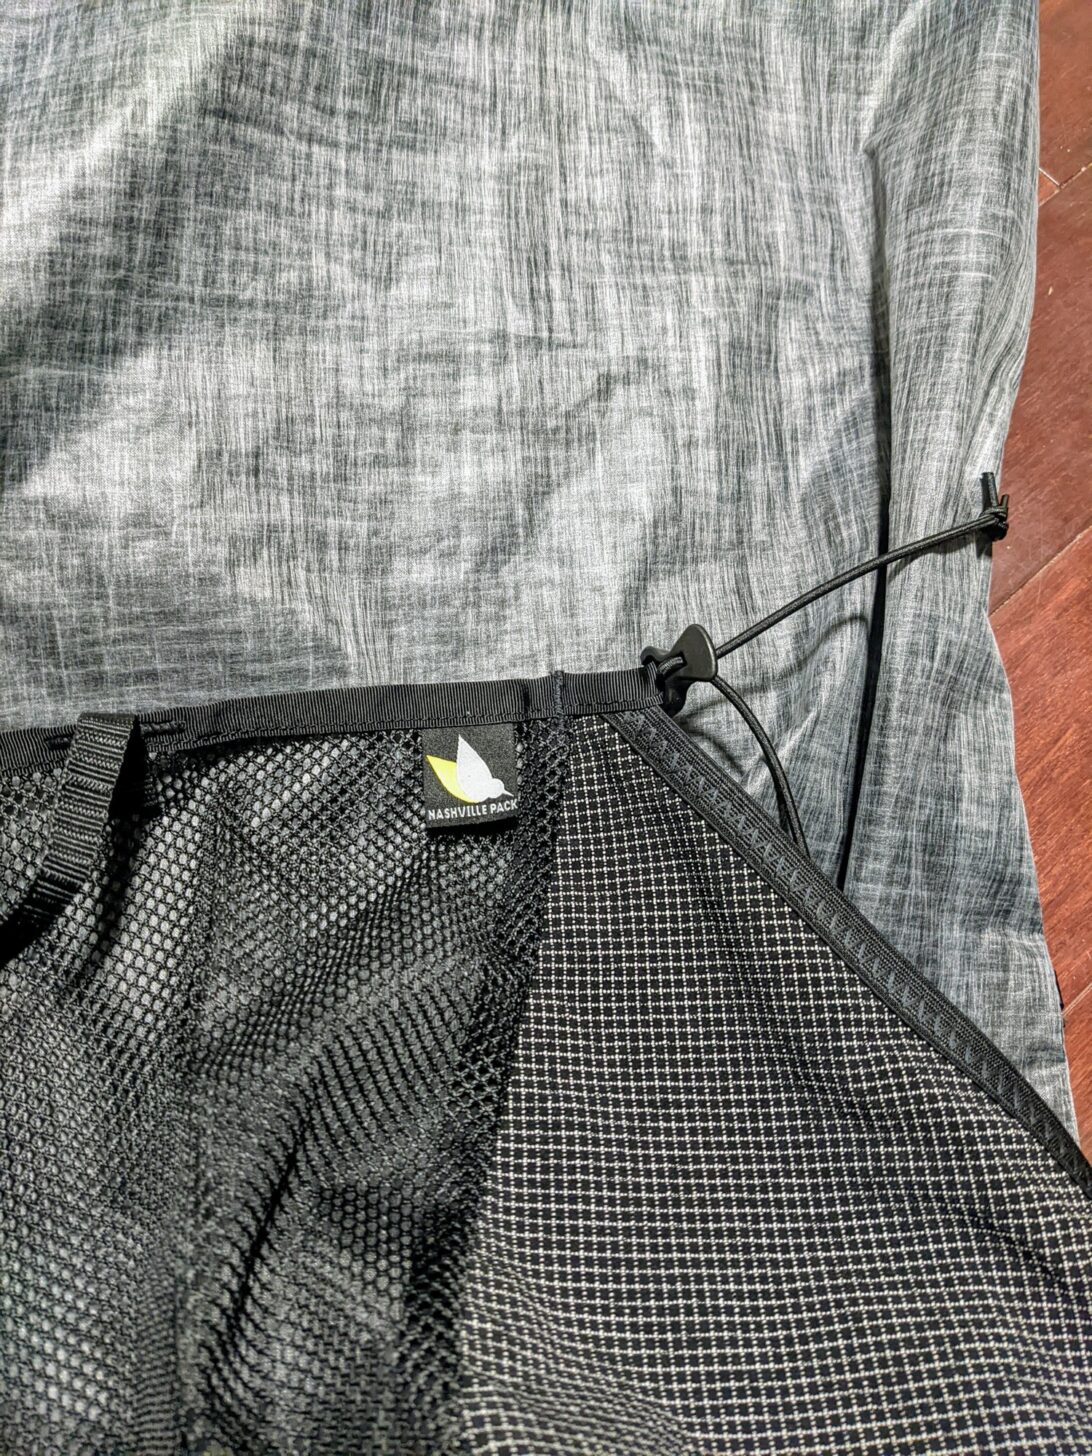 A close up of a cord running from the side of the Nashville Pack Cutaway backpack to the top corner of a pocket